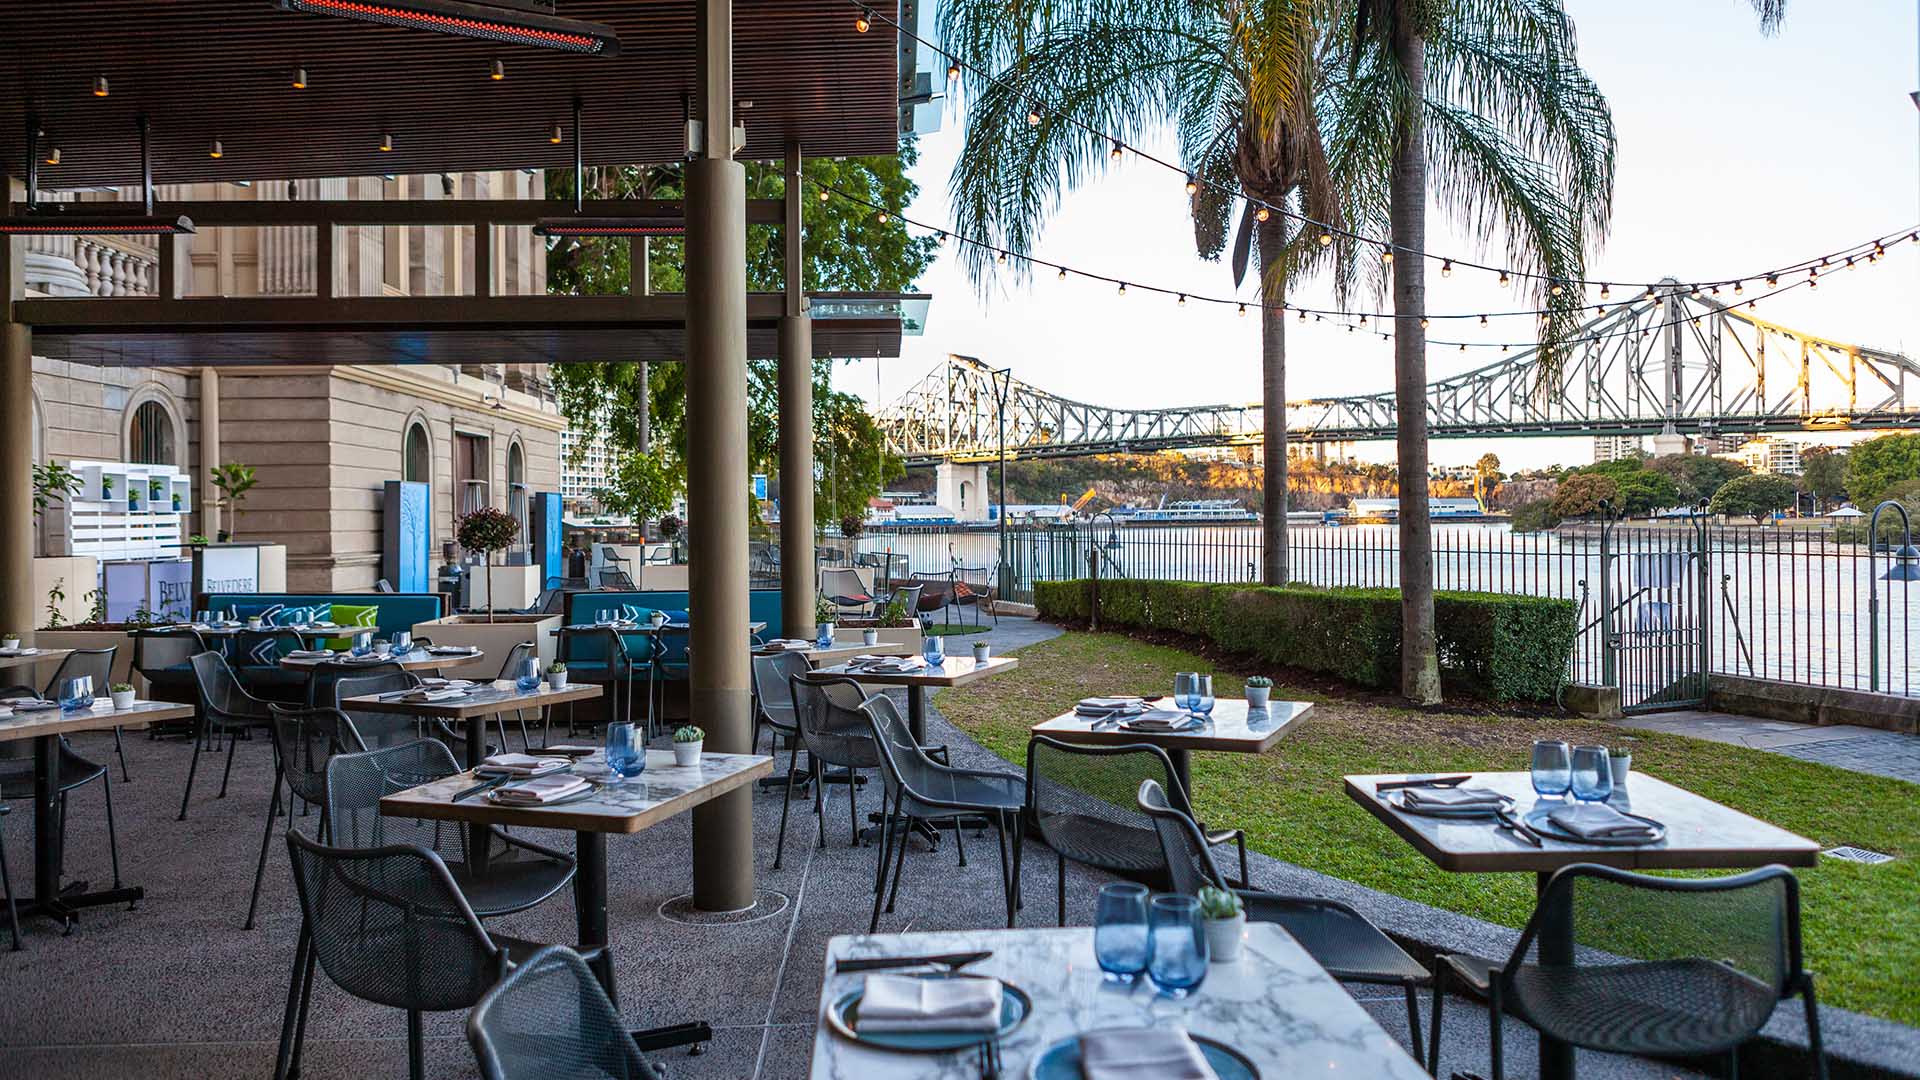 Patina Is the Brisbane CBD's New Waterfront Dining Spot with a Killer View